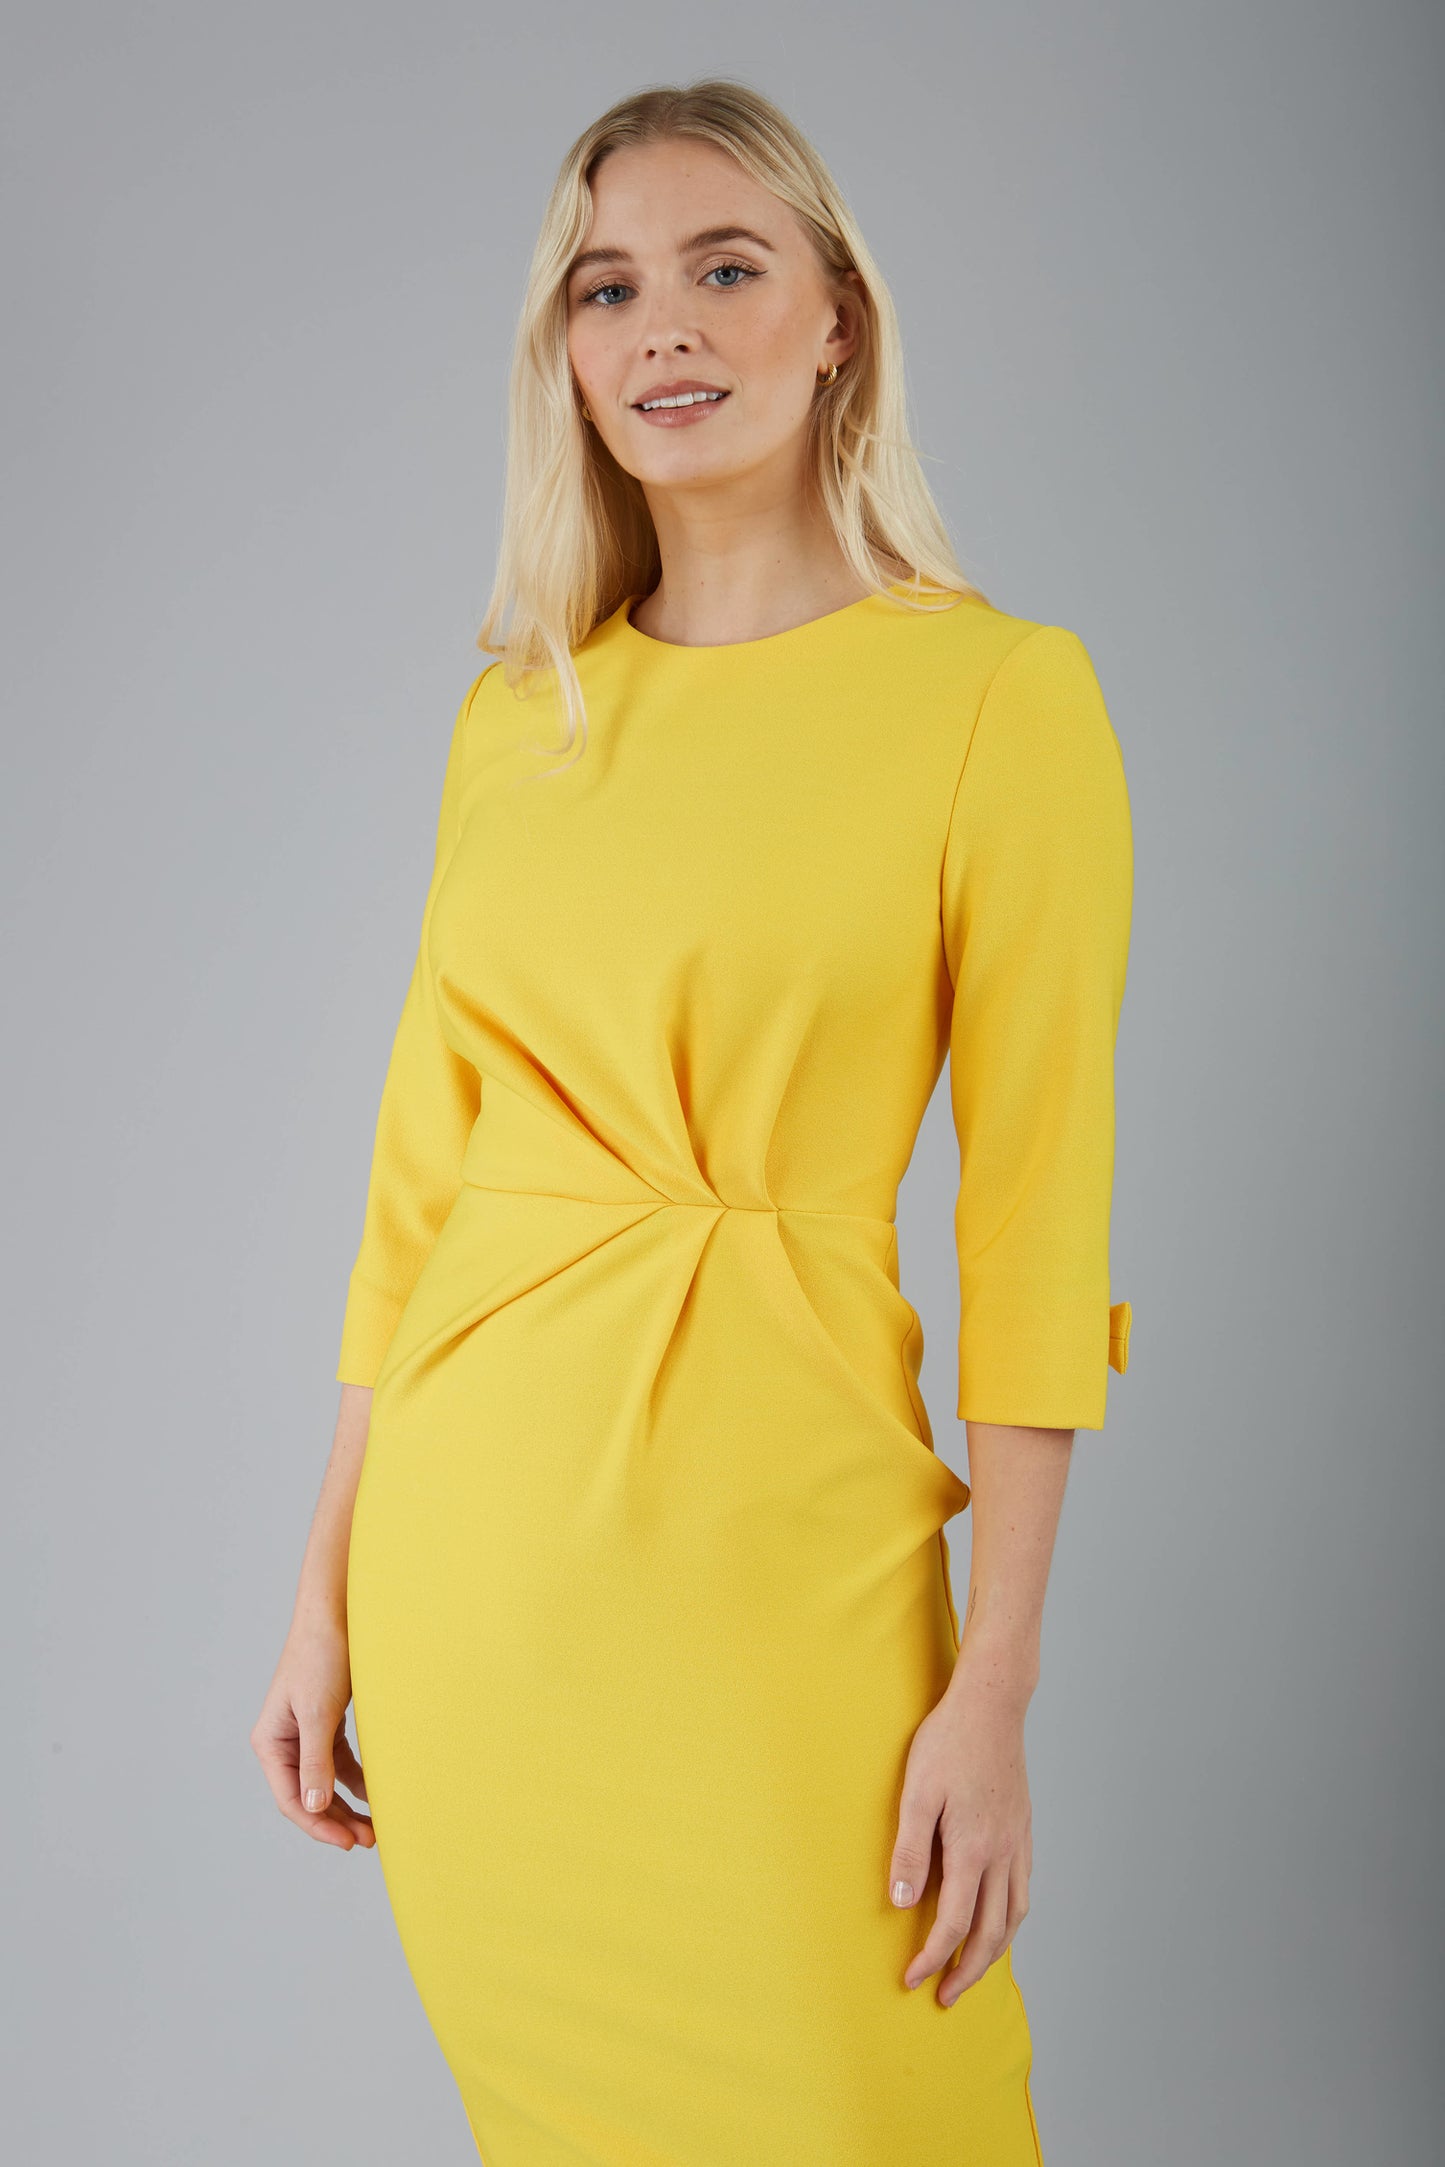 blonde model is wearing diva catwalk logan round neck sleeved pencil dress with side arrow pleating detail in daffodil yellow front